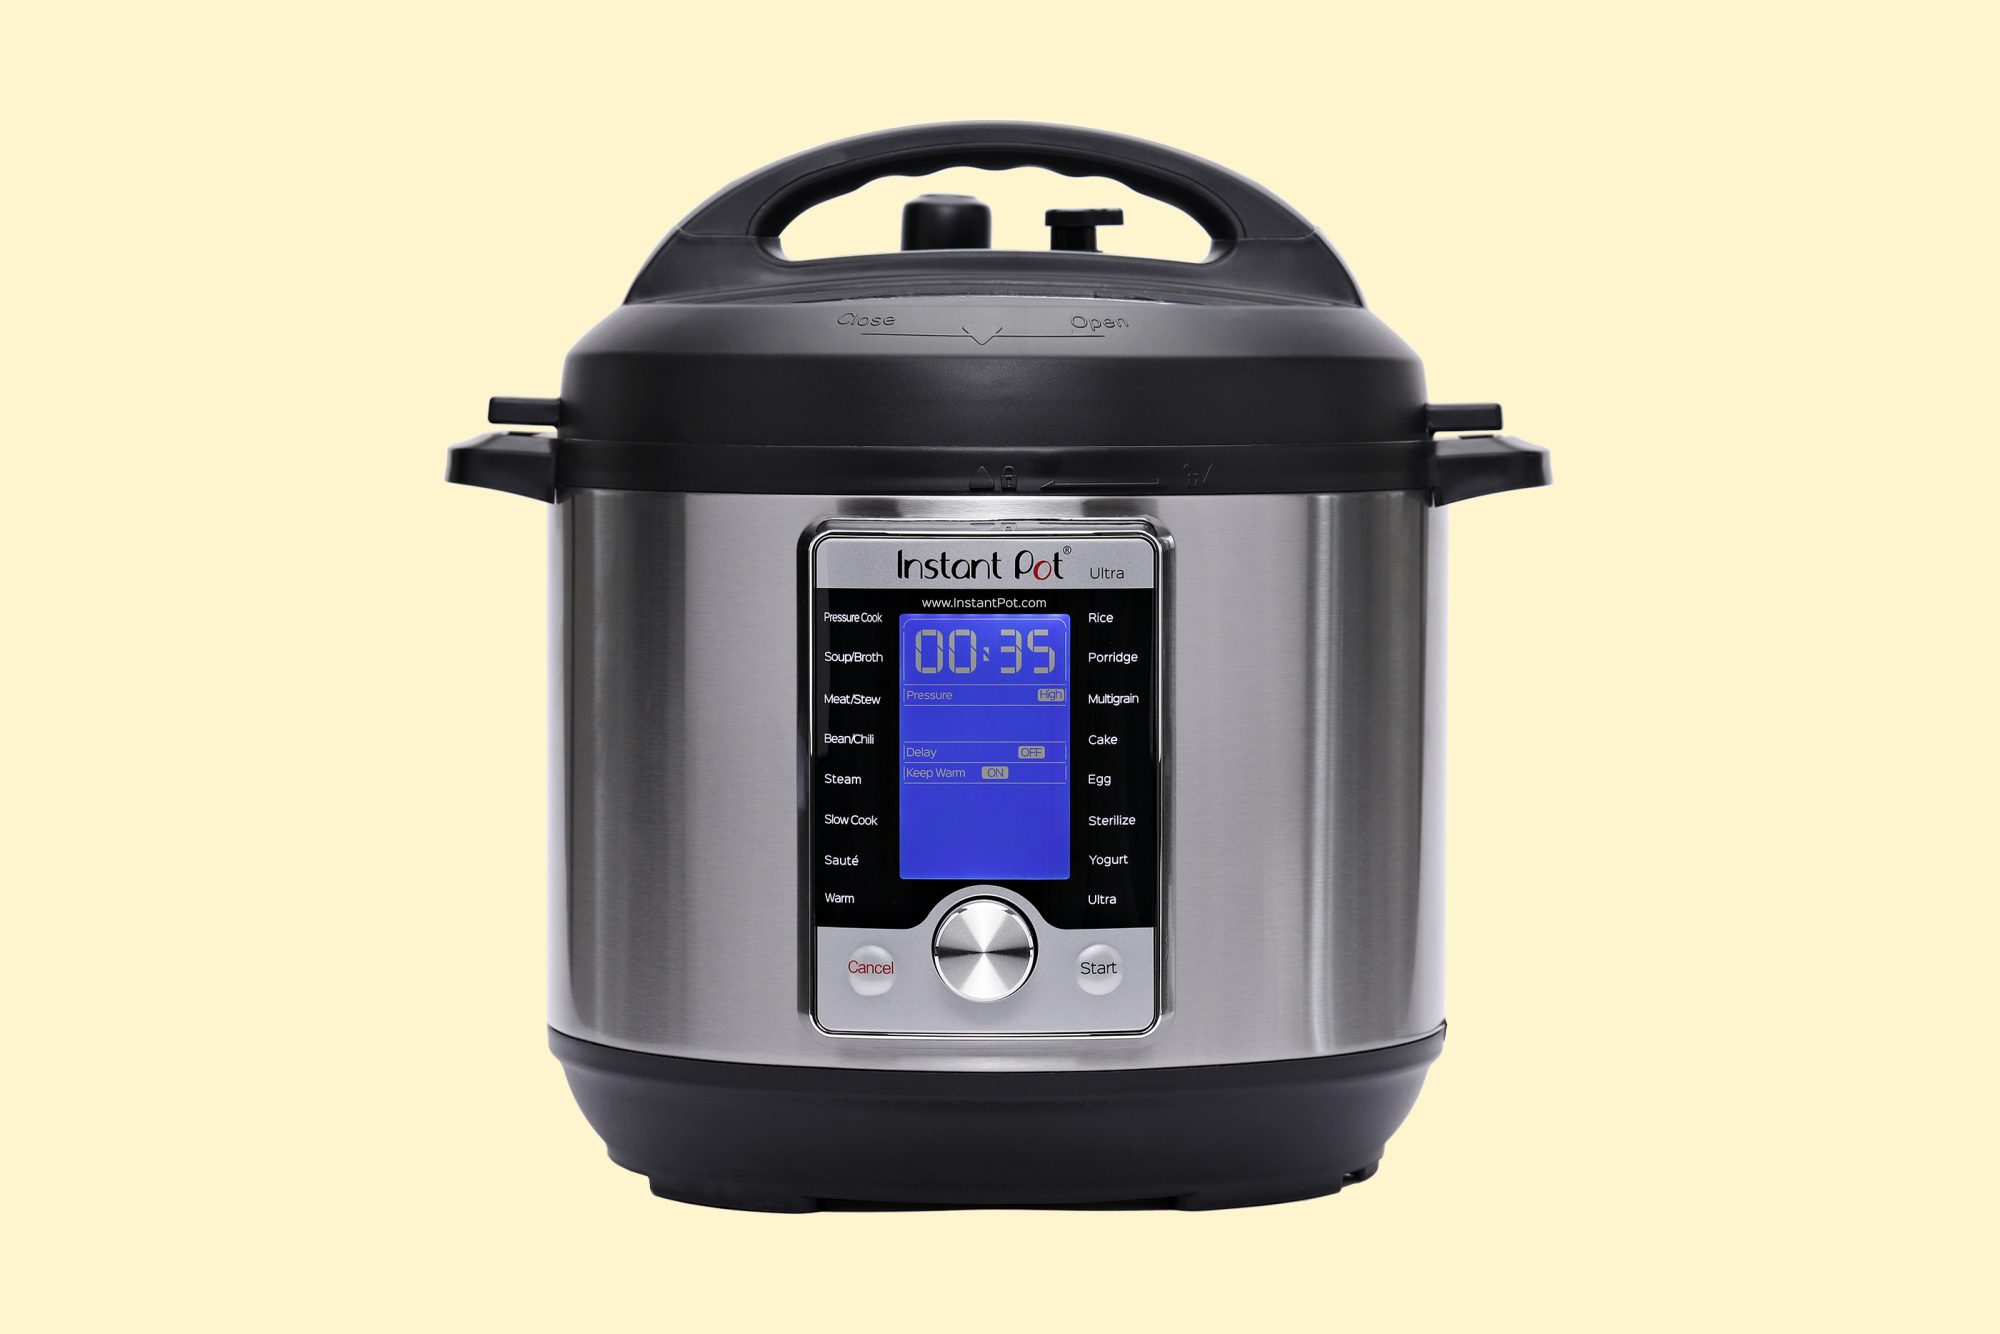 Here Are the Best Instant Pot Cyber Monday 2017 Deals